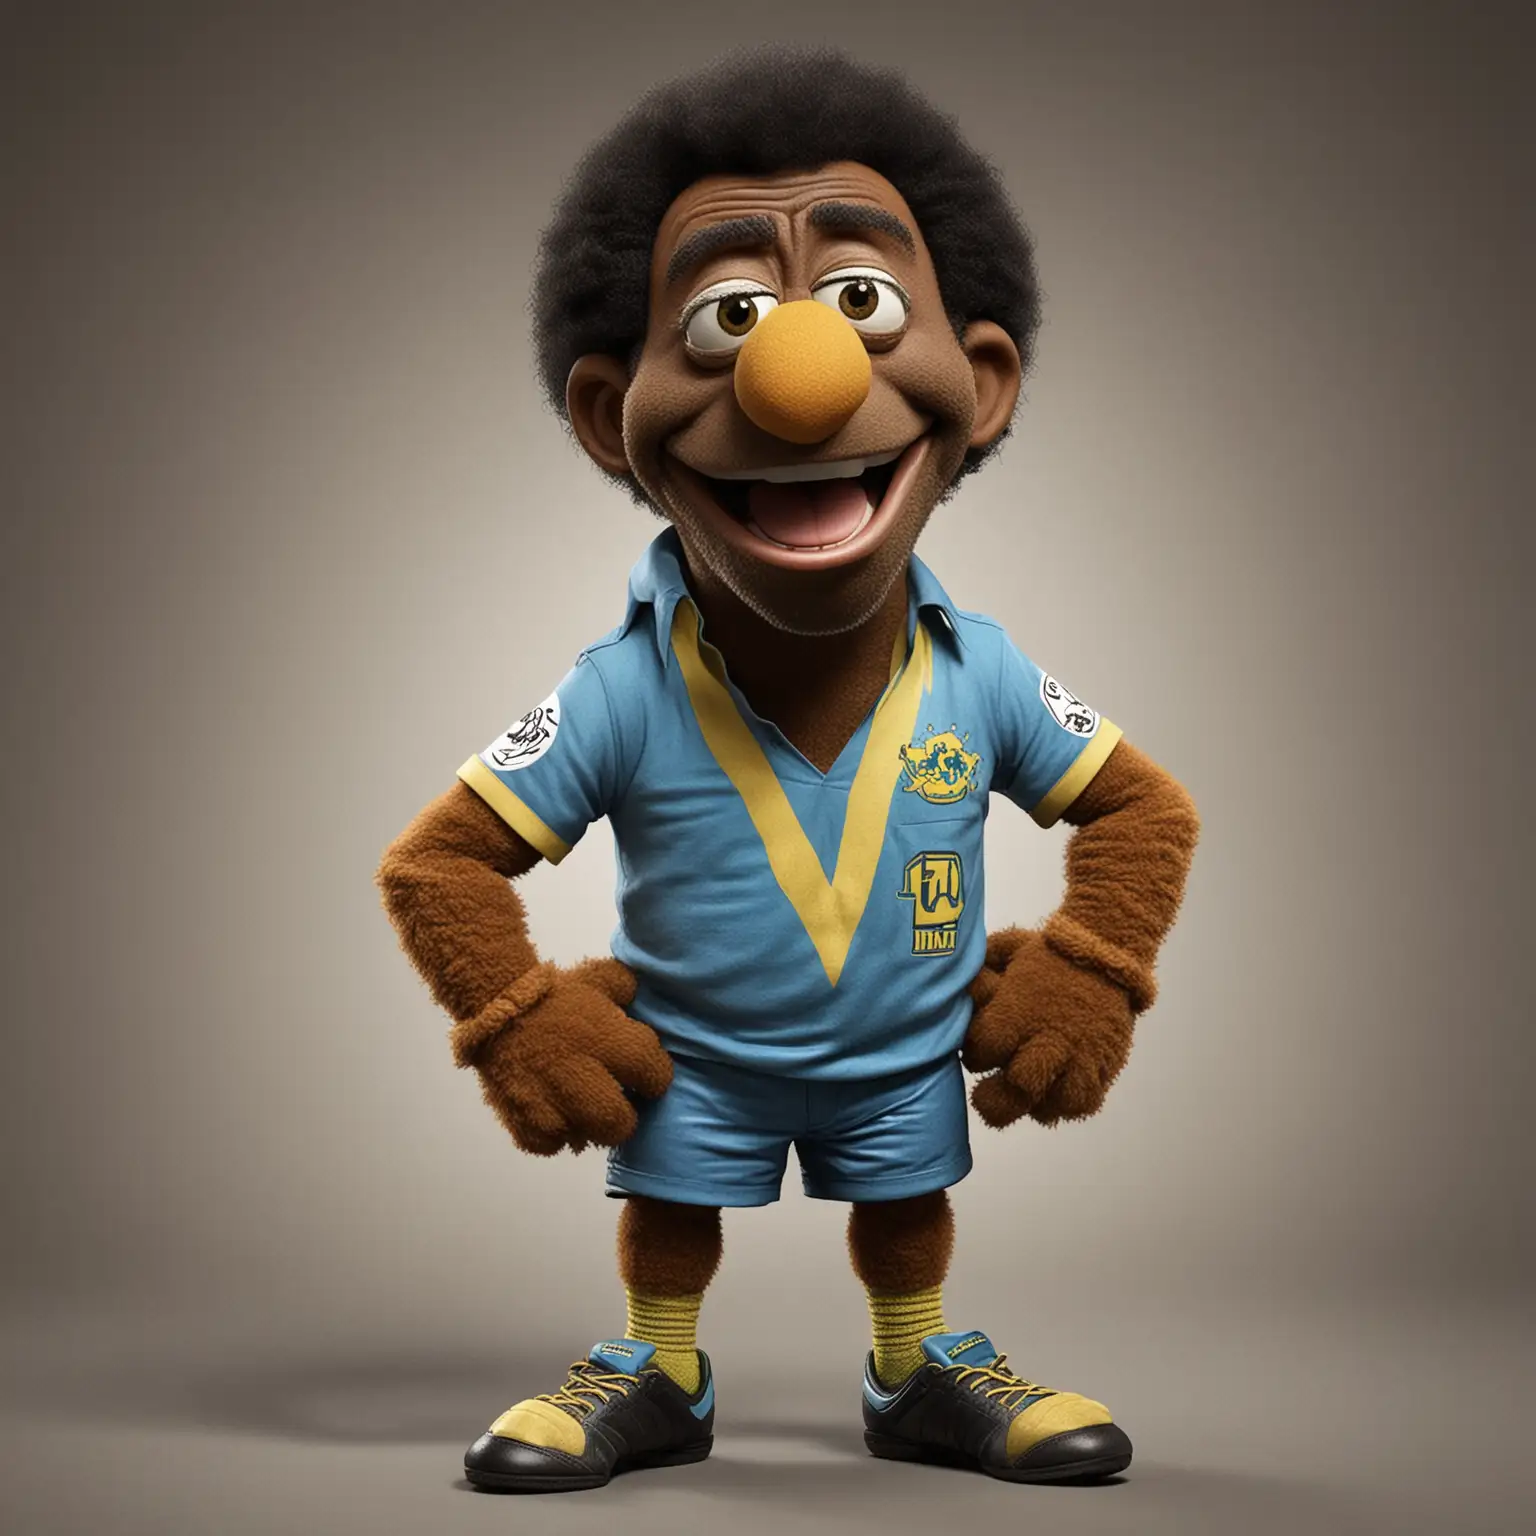 Pelé in the style of the Muppets.